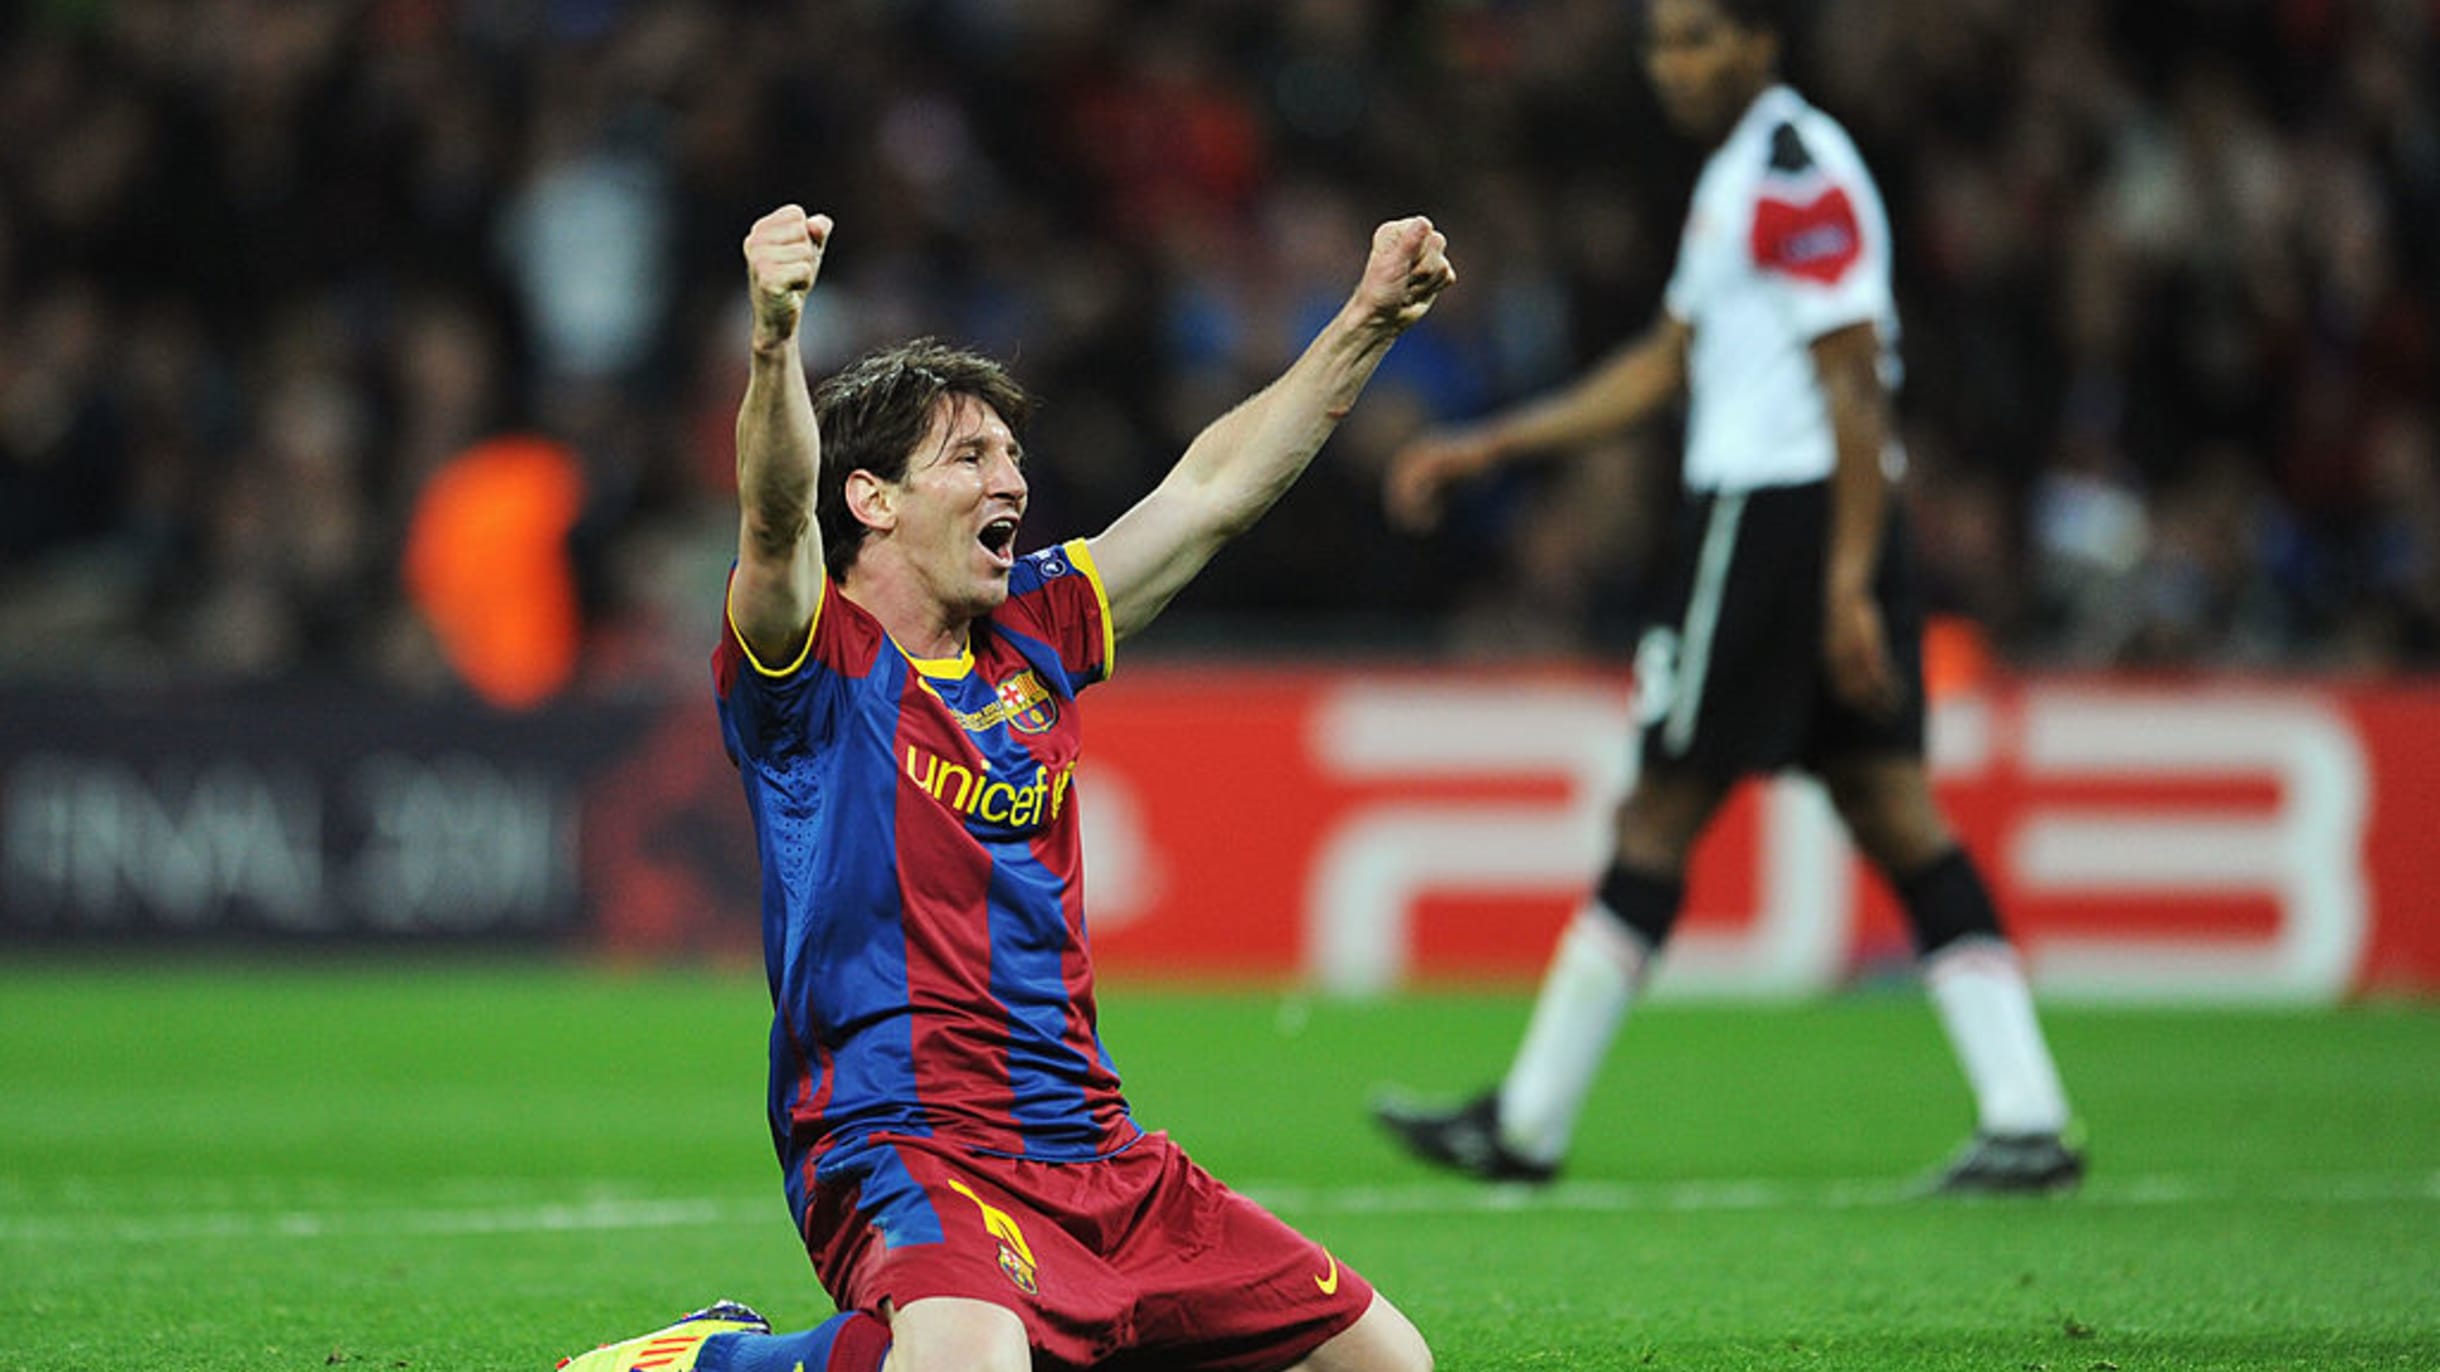 Modstand Reproducere Vær venlig How many teams has Messi played for? Know them all